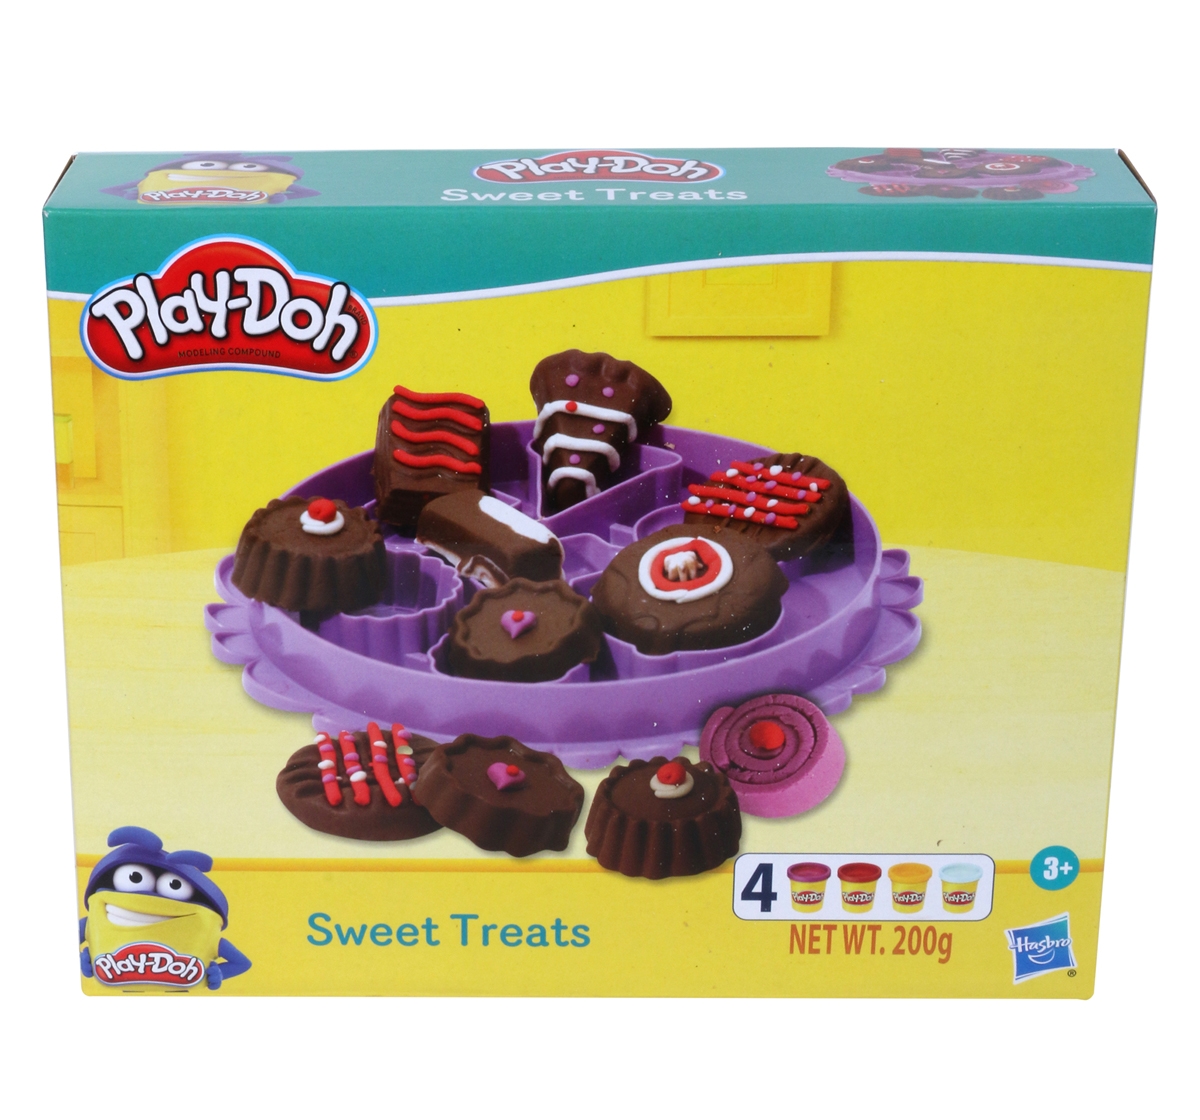 Play-Doh | Play Doh Sweet Treats Playset for Kids 3Y+, Multicolour 2